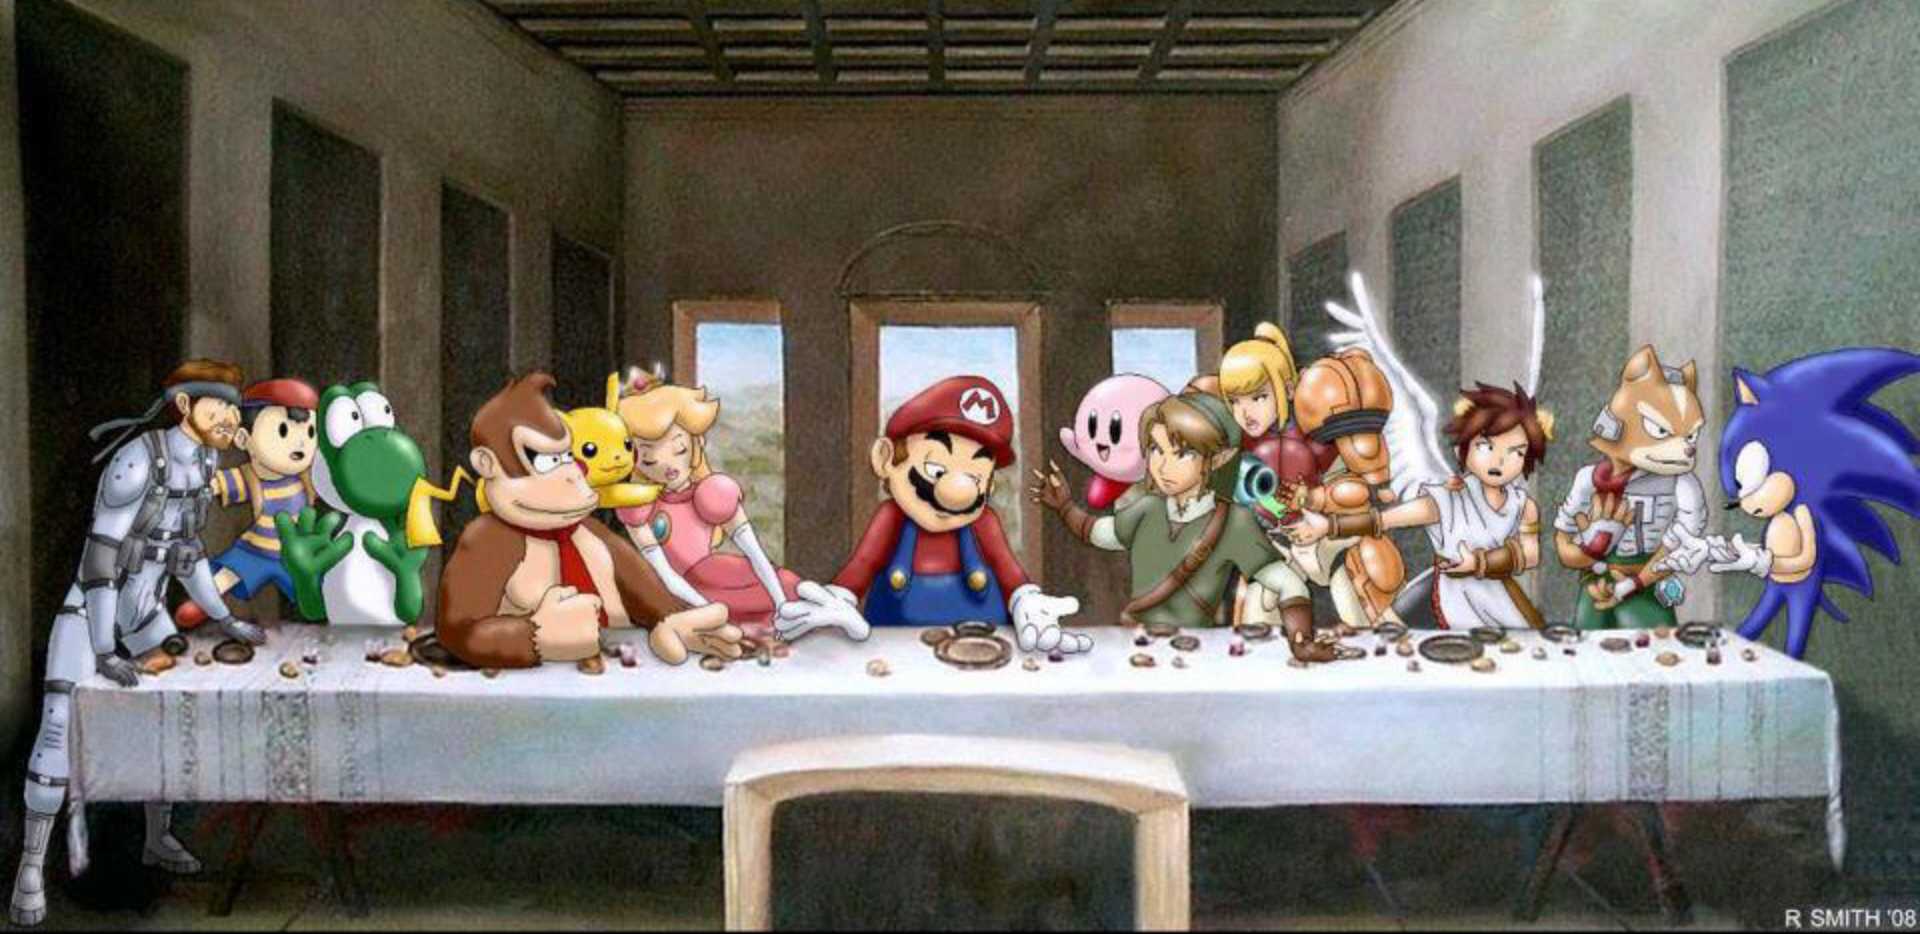 The Last Supper Nintendo Style